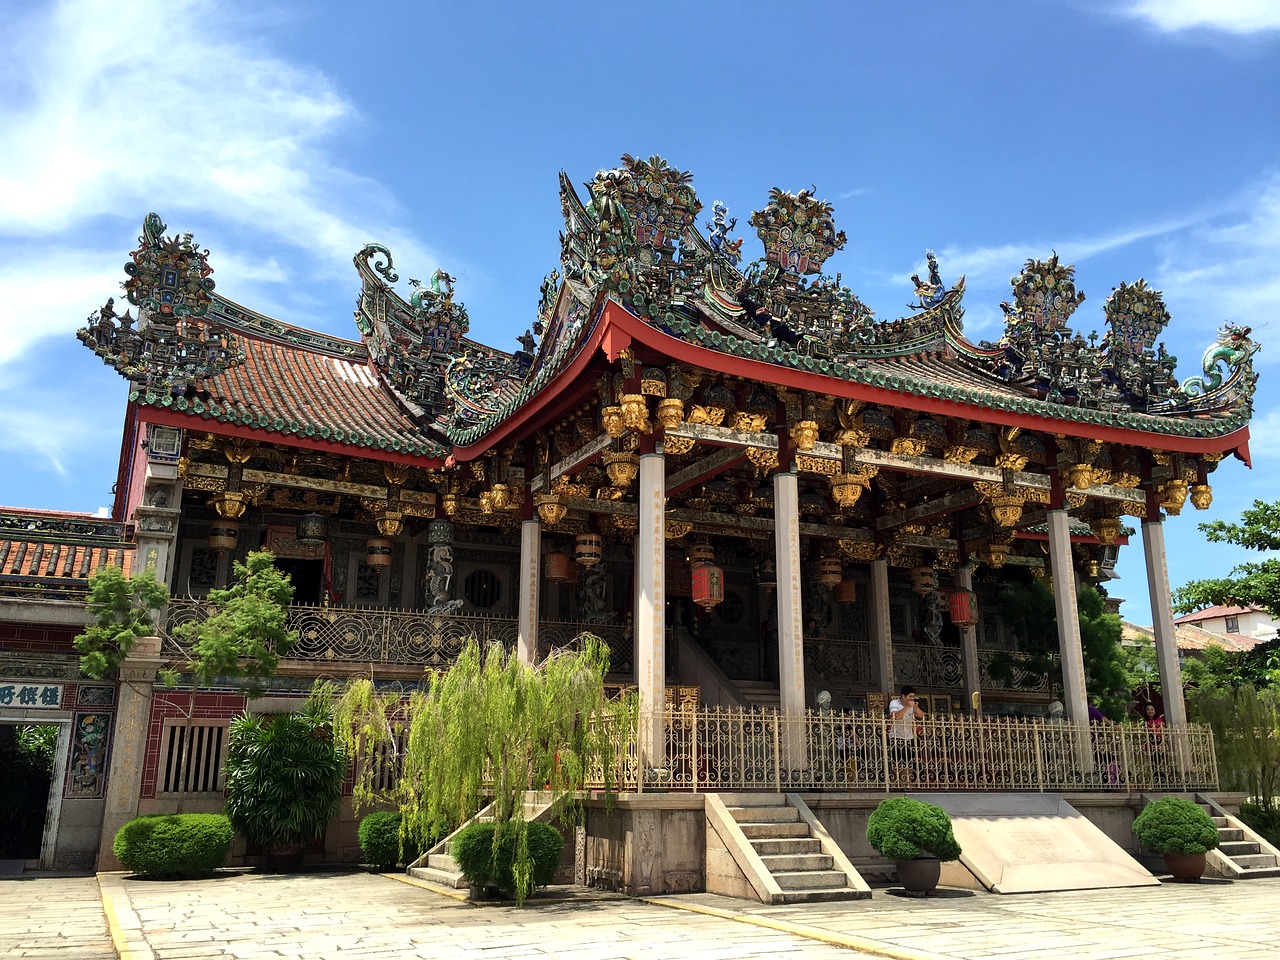 Khoo Kongsi one of the Top 10 attractions in Malaysia